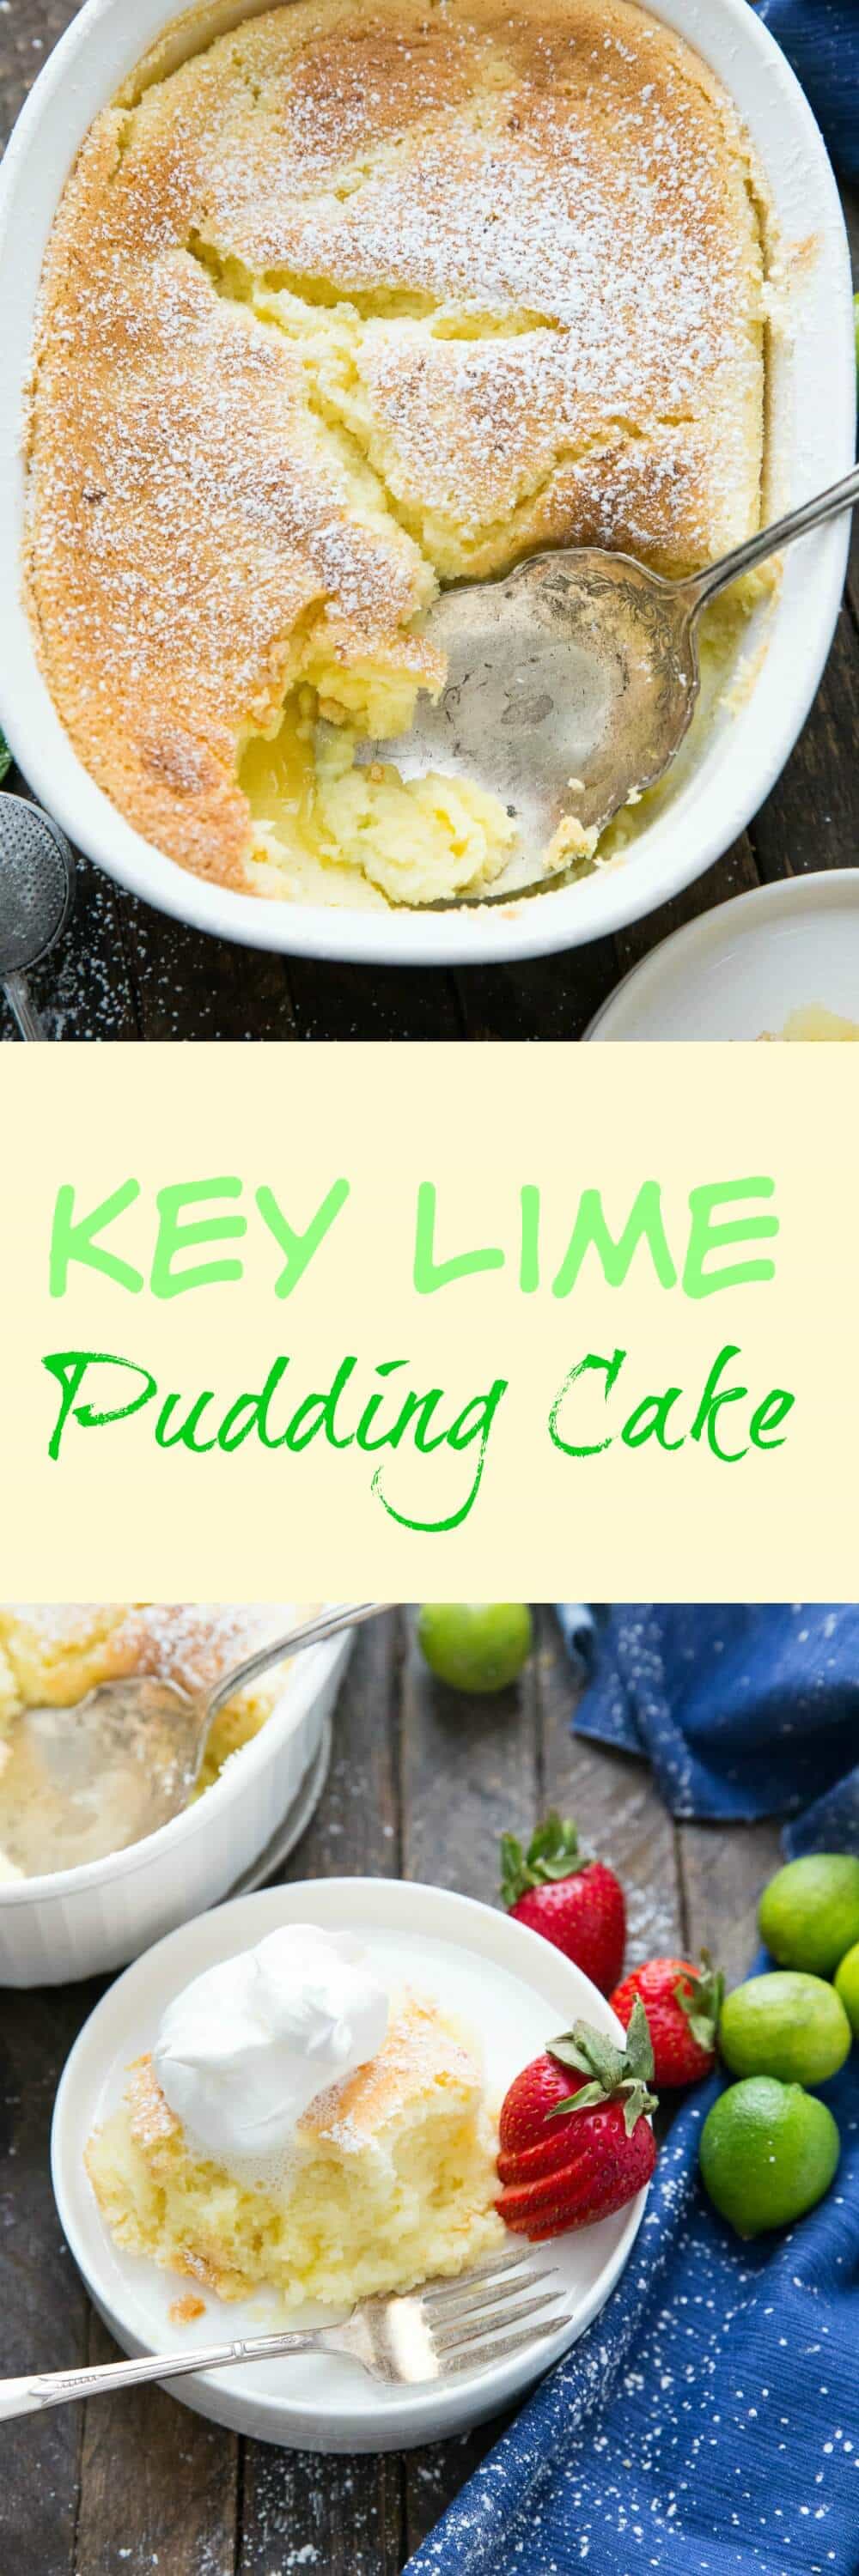 Pudding cakes are magical! This dessert features a light cake layer that gets baked up over a tangy pudding layer. This is impressive yet simple!